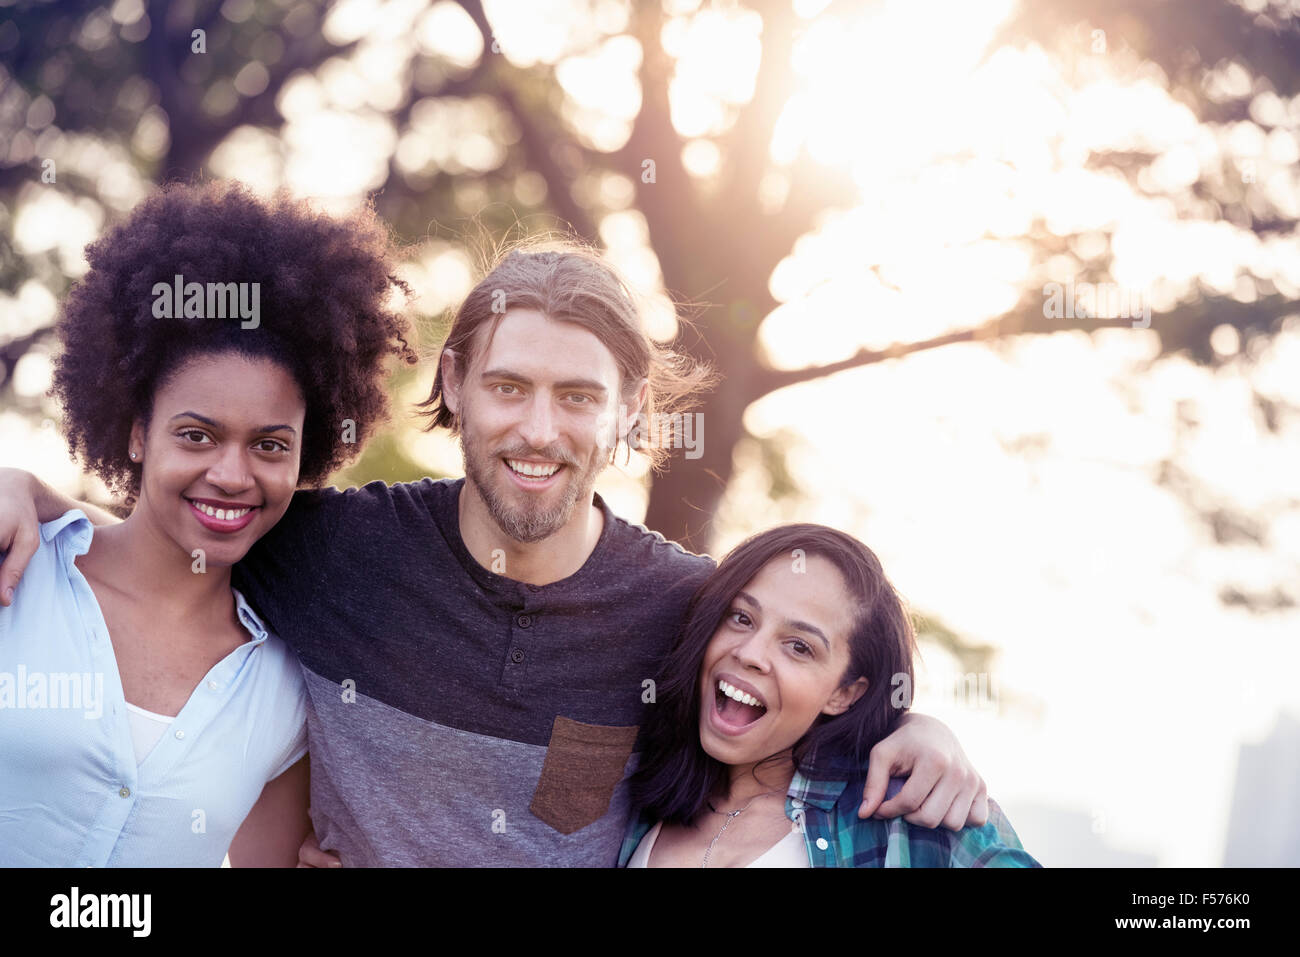 Three people, a man and two women side by side smiling Stock Photo